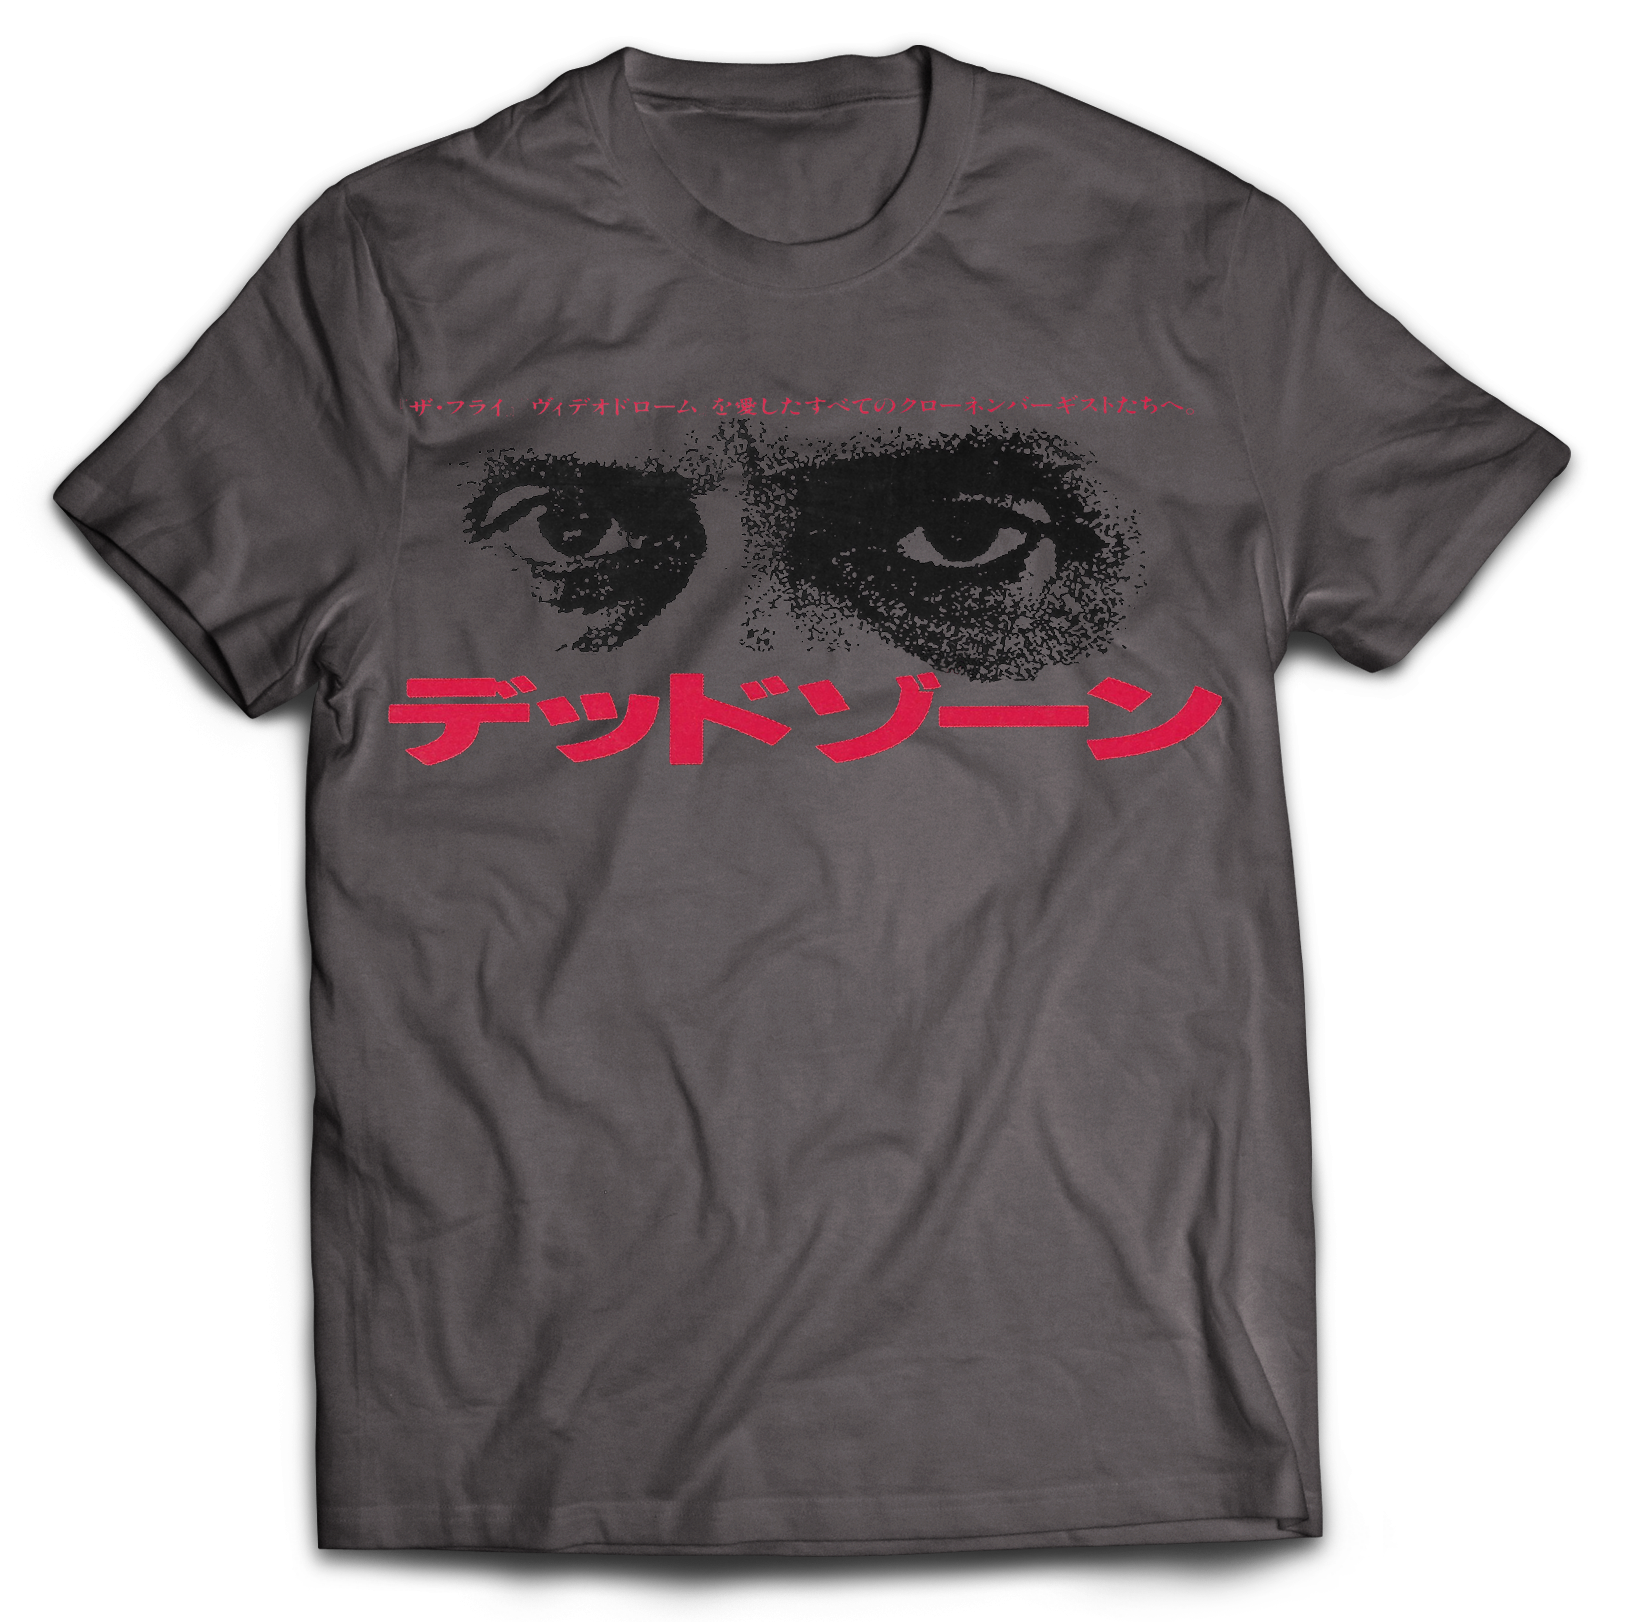 THE DEAD ZONE: "EYES" T-SHIRT